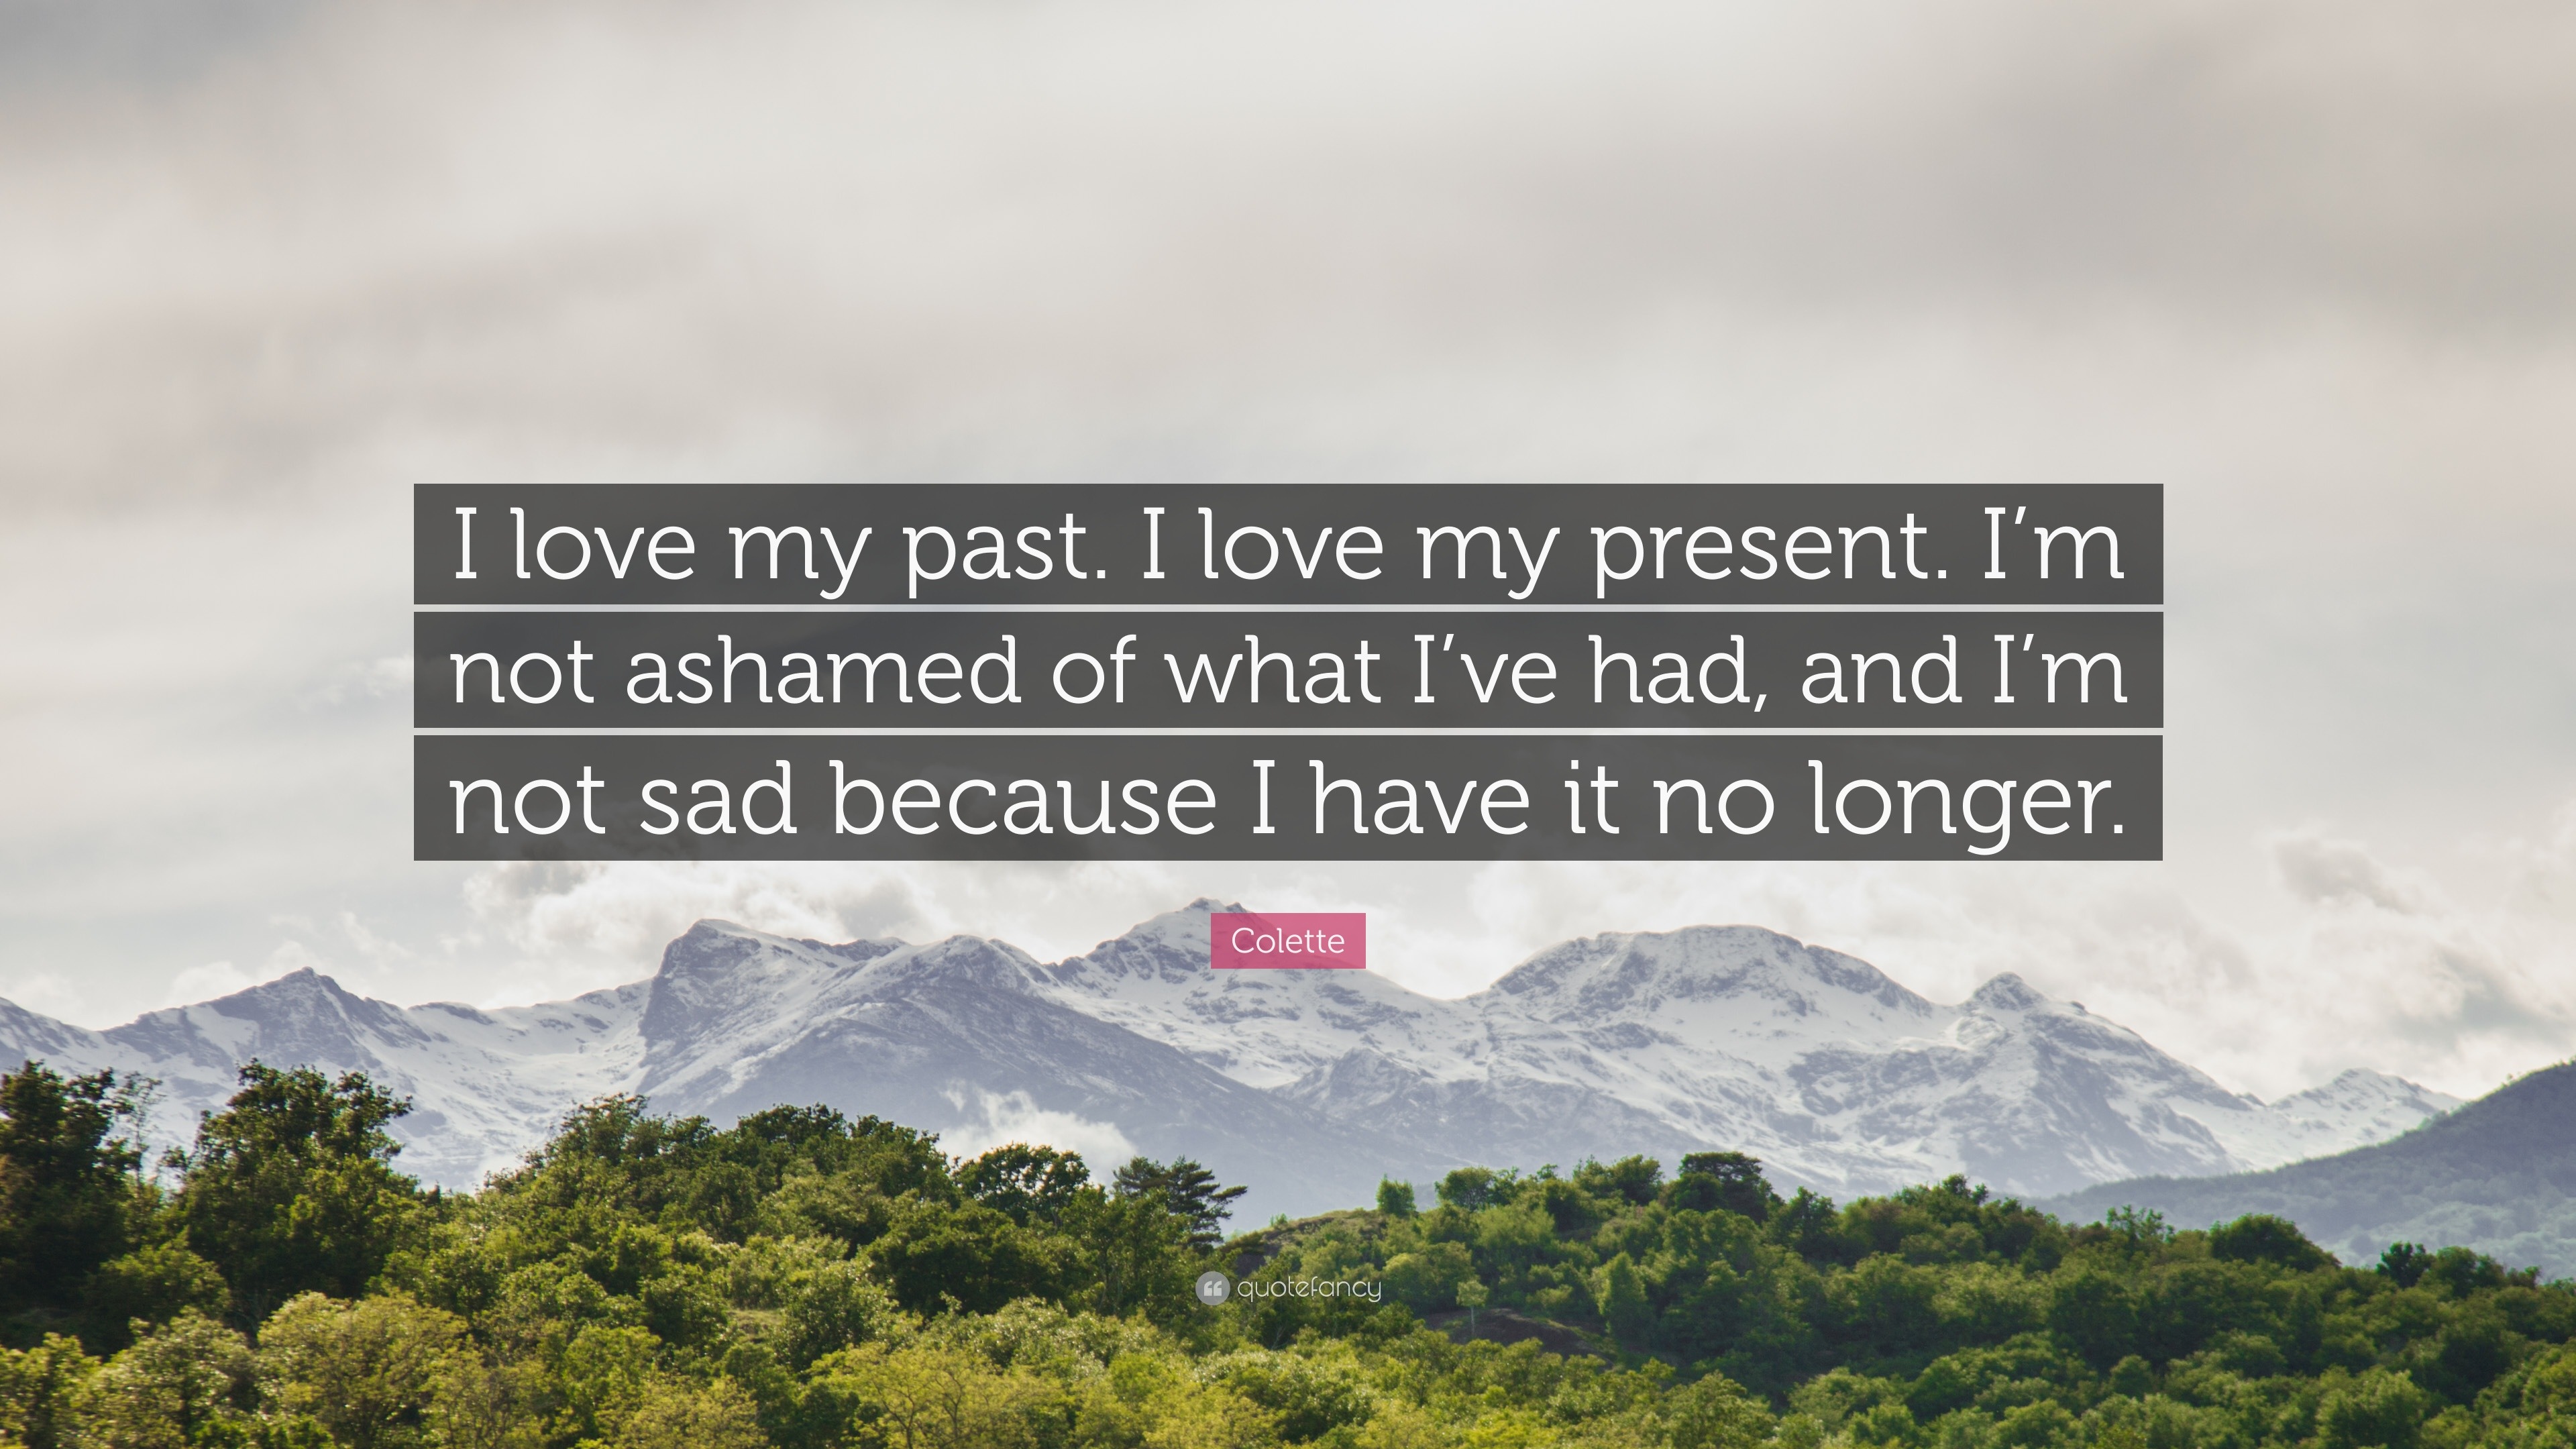 Colette Quote “I love my past I love my present I